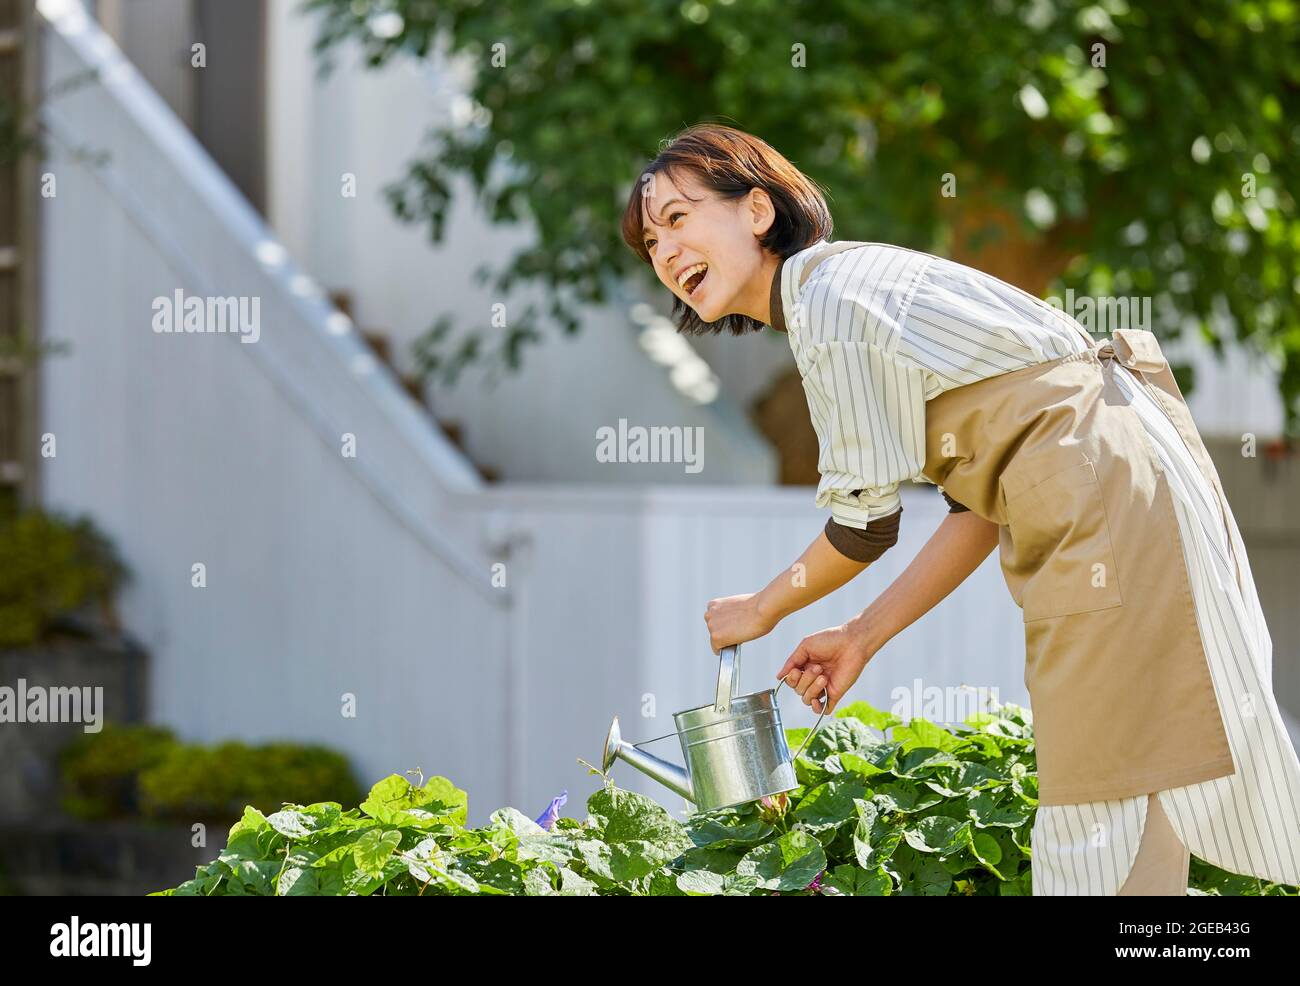 Japanese woman working in the garden Stock Photo